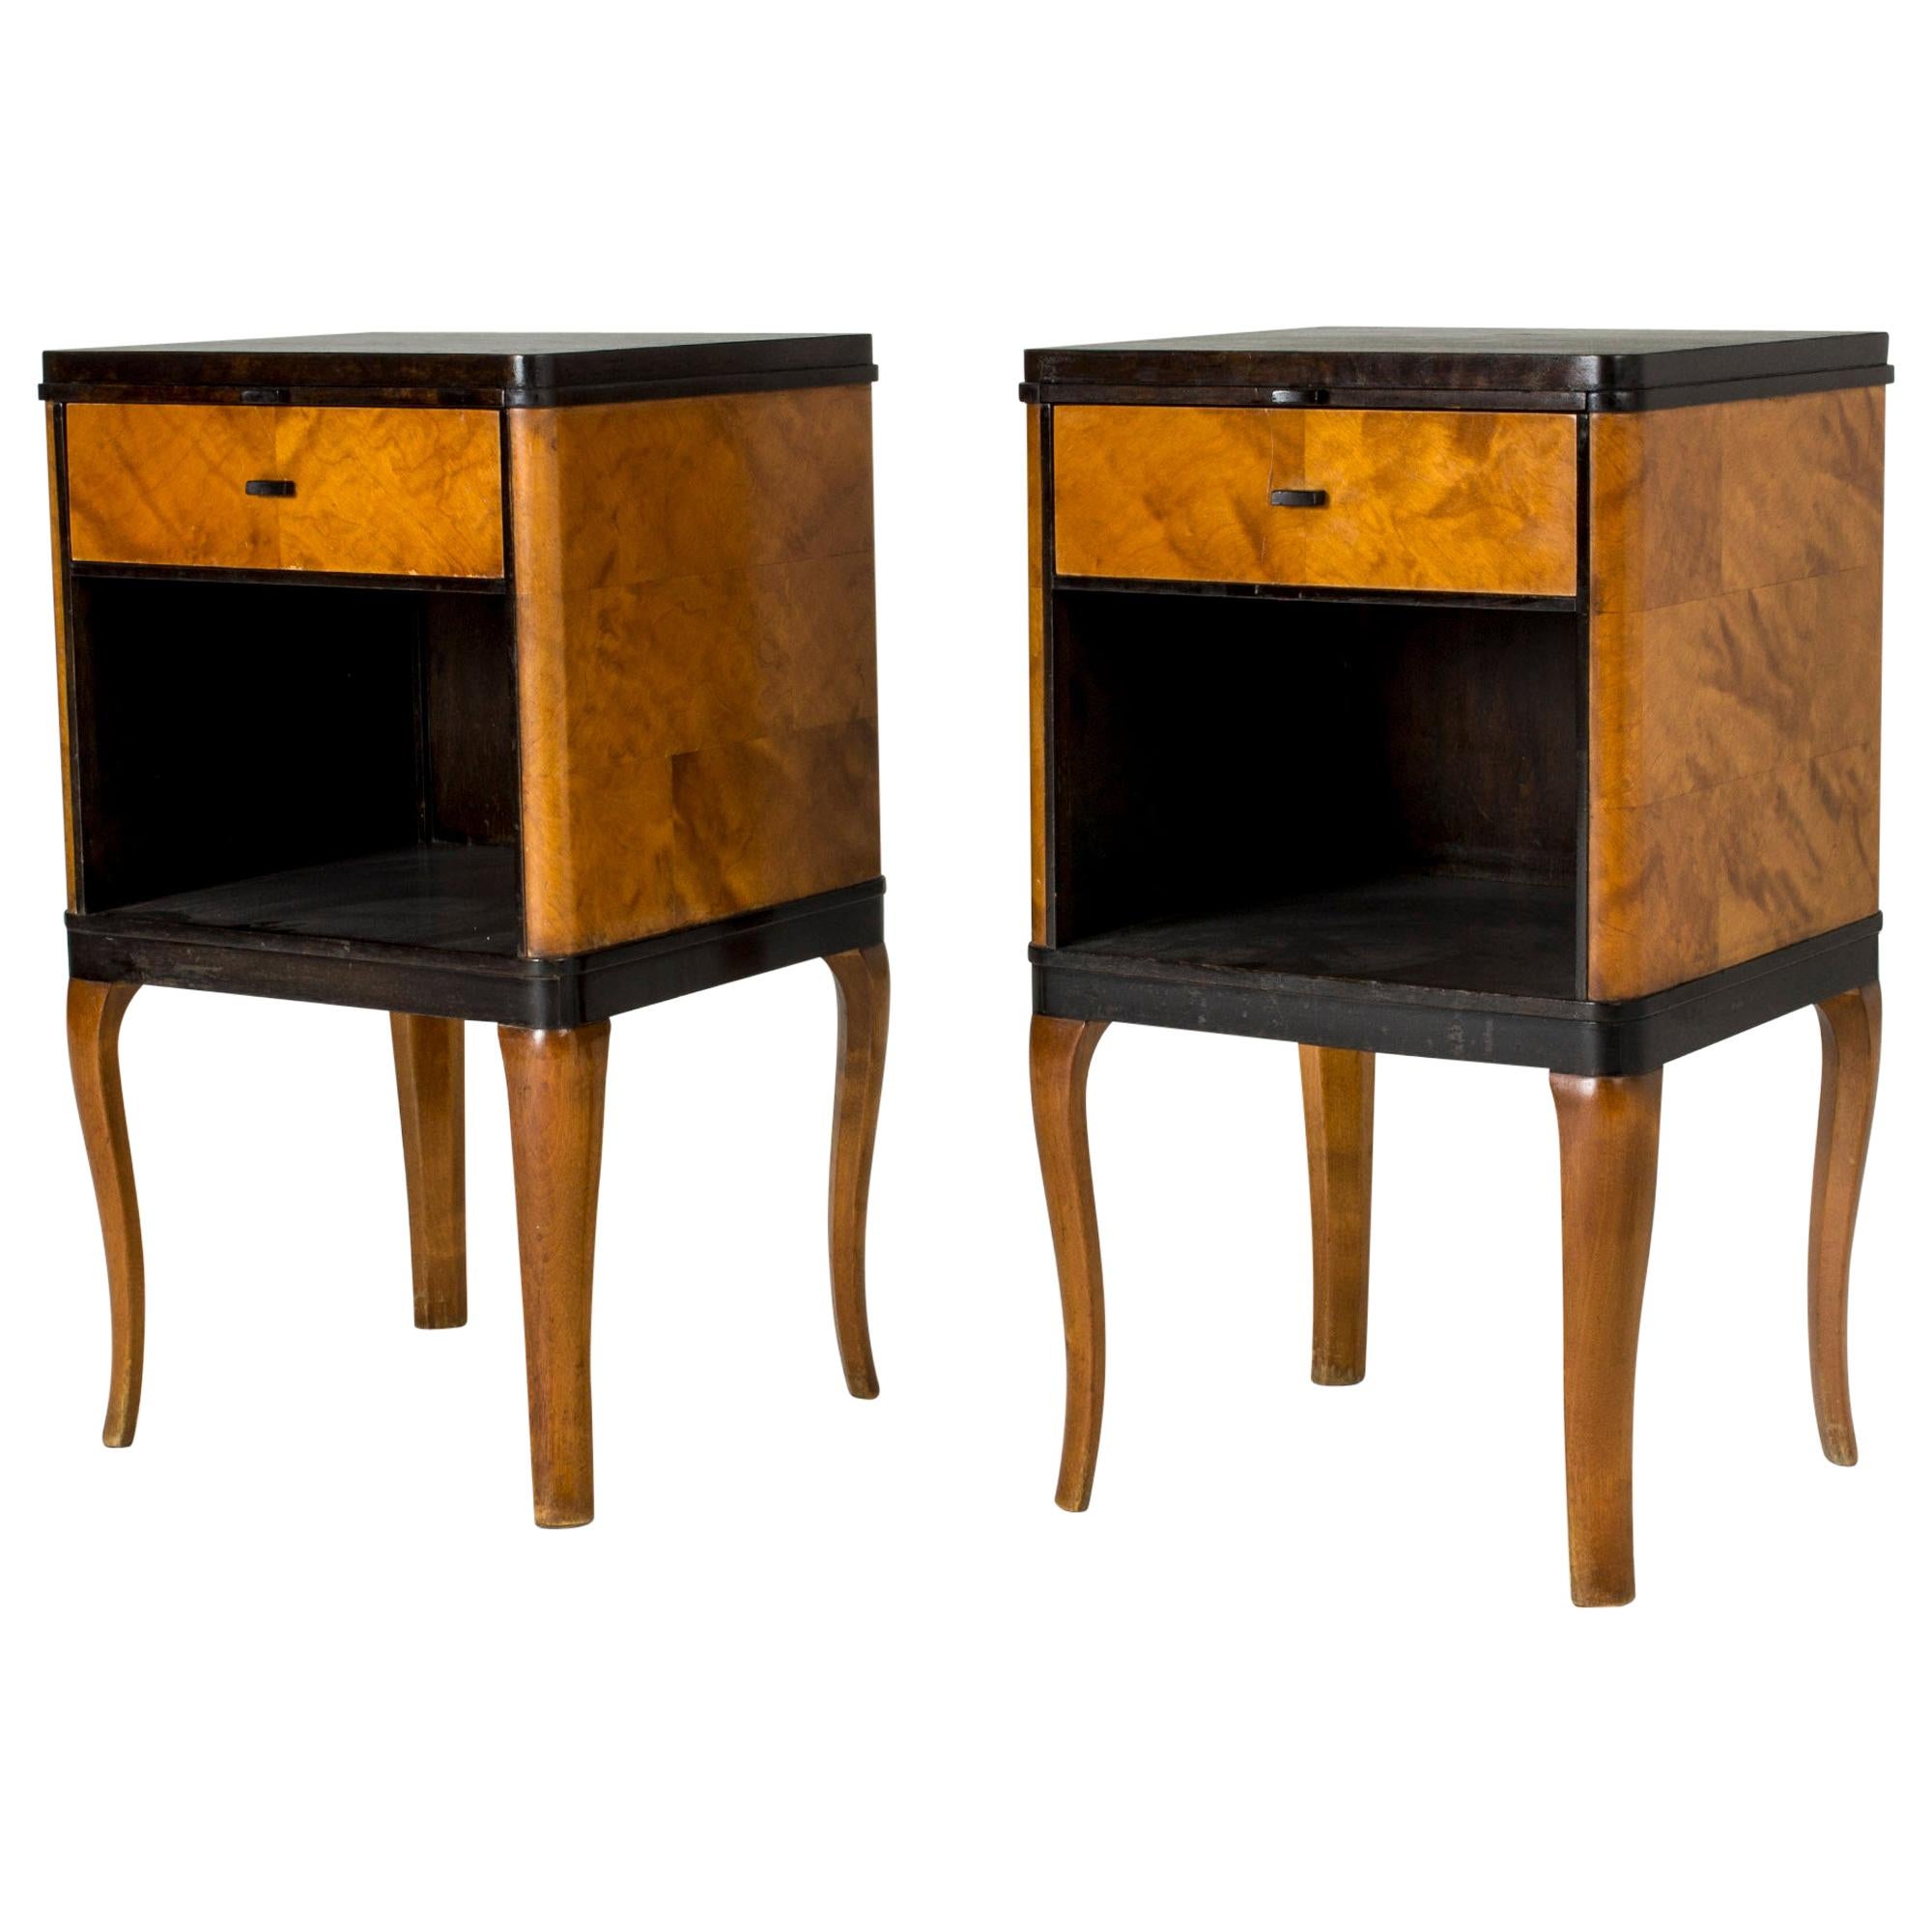 Pair of "Haga" Side Tables by Carl Malmsten For Sale